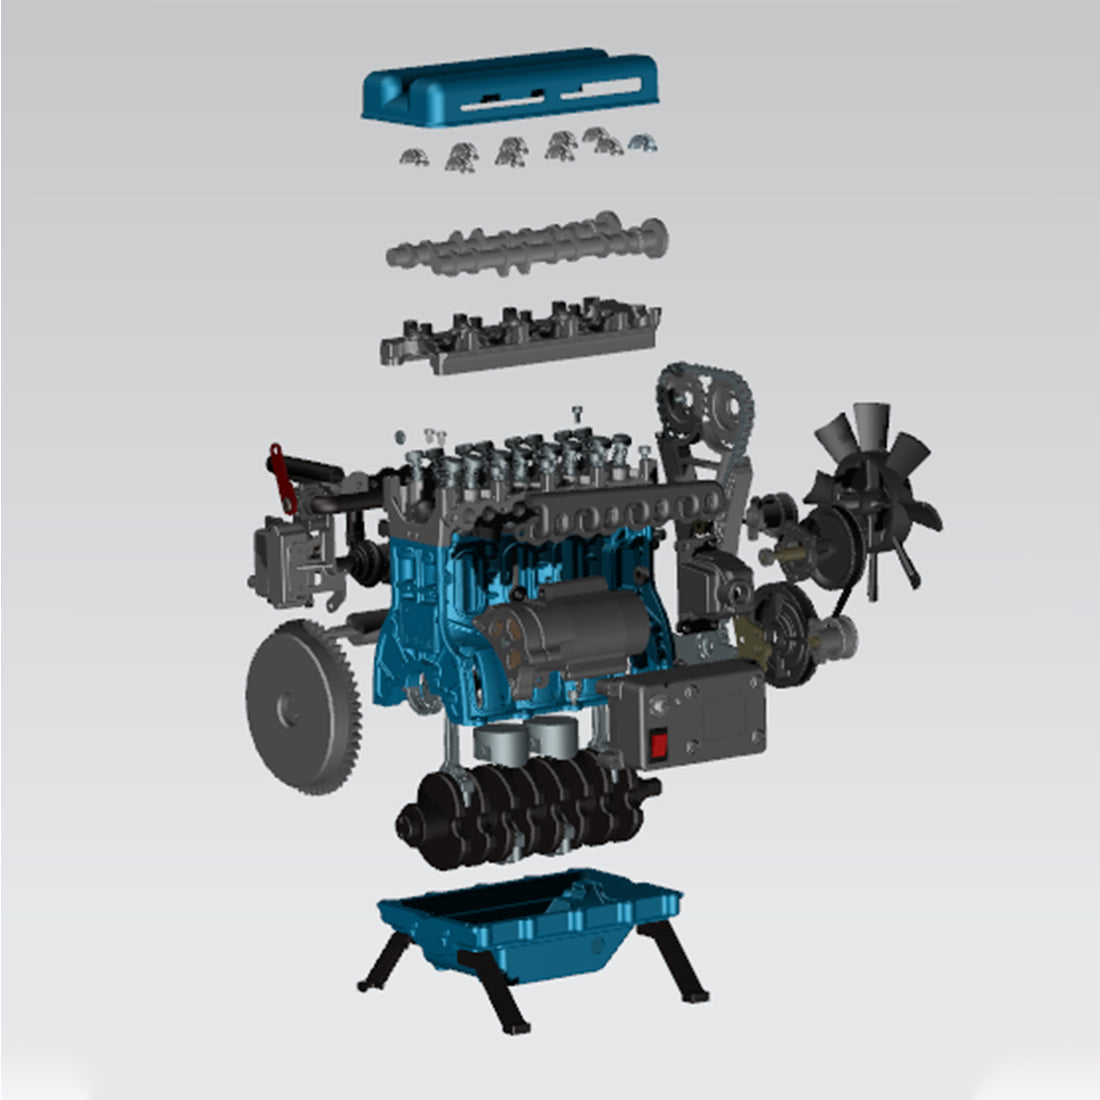 TECHING Updated L4 Engine Model Kit that Works - Build Your Own Engine - Full Metal 4 Cylinder Car Engine Kit Car Engine Model - ENGINEDIY